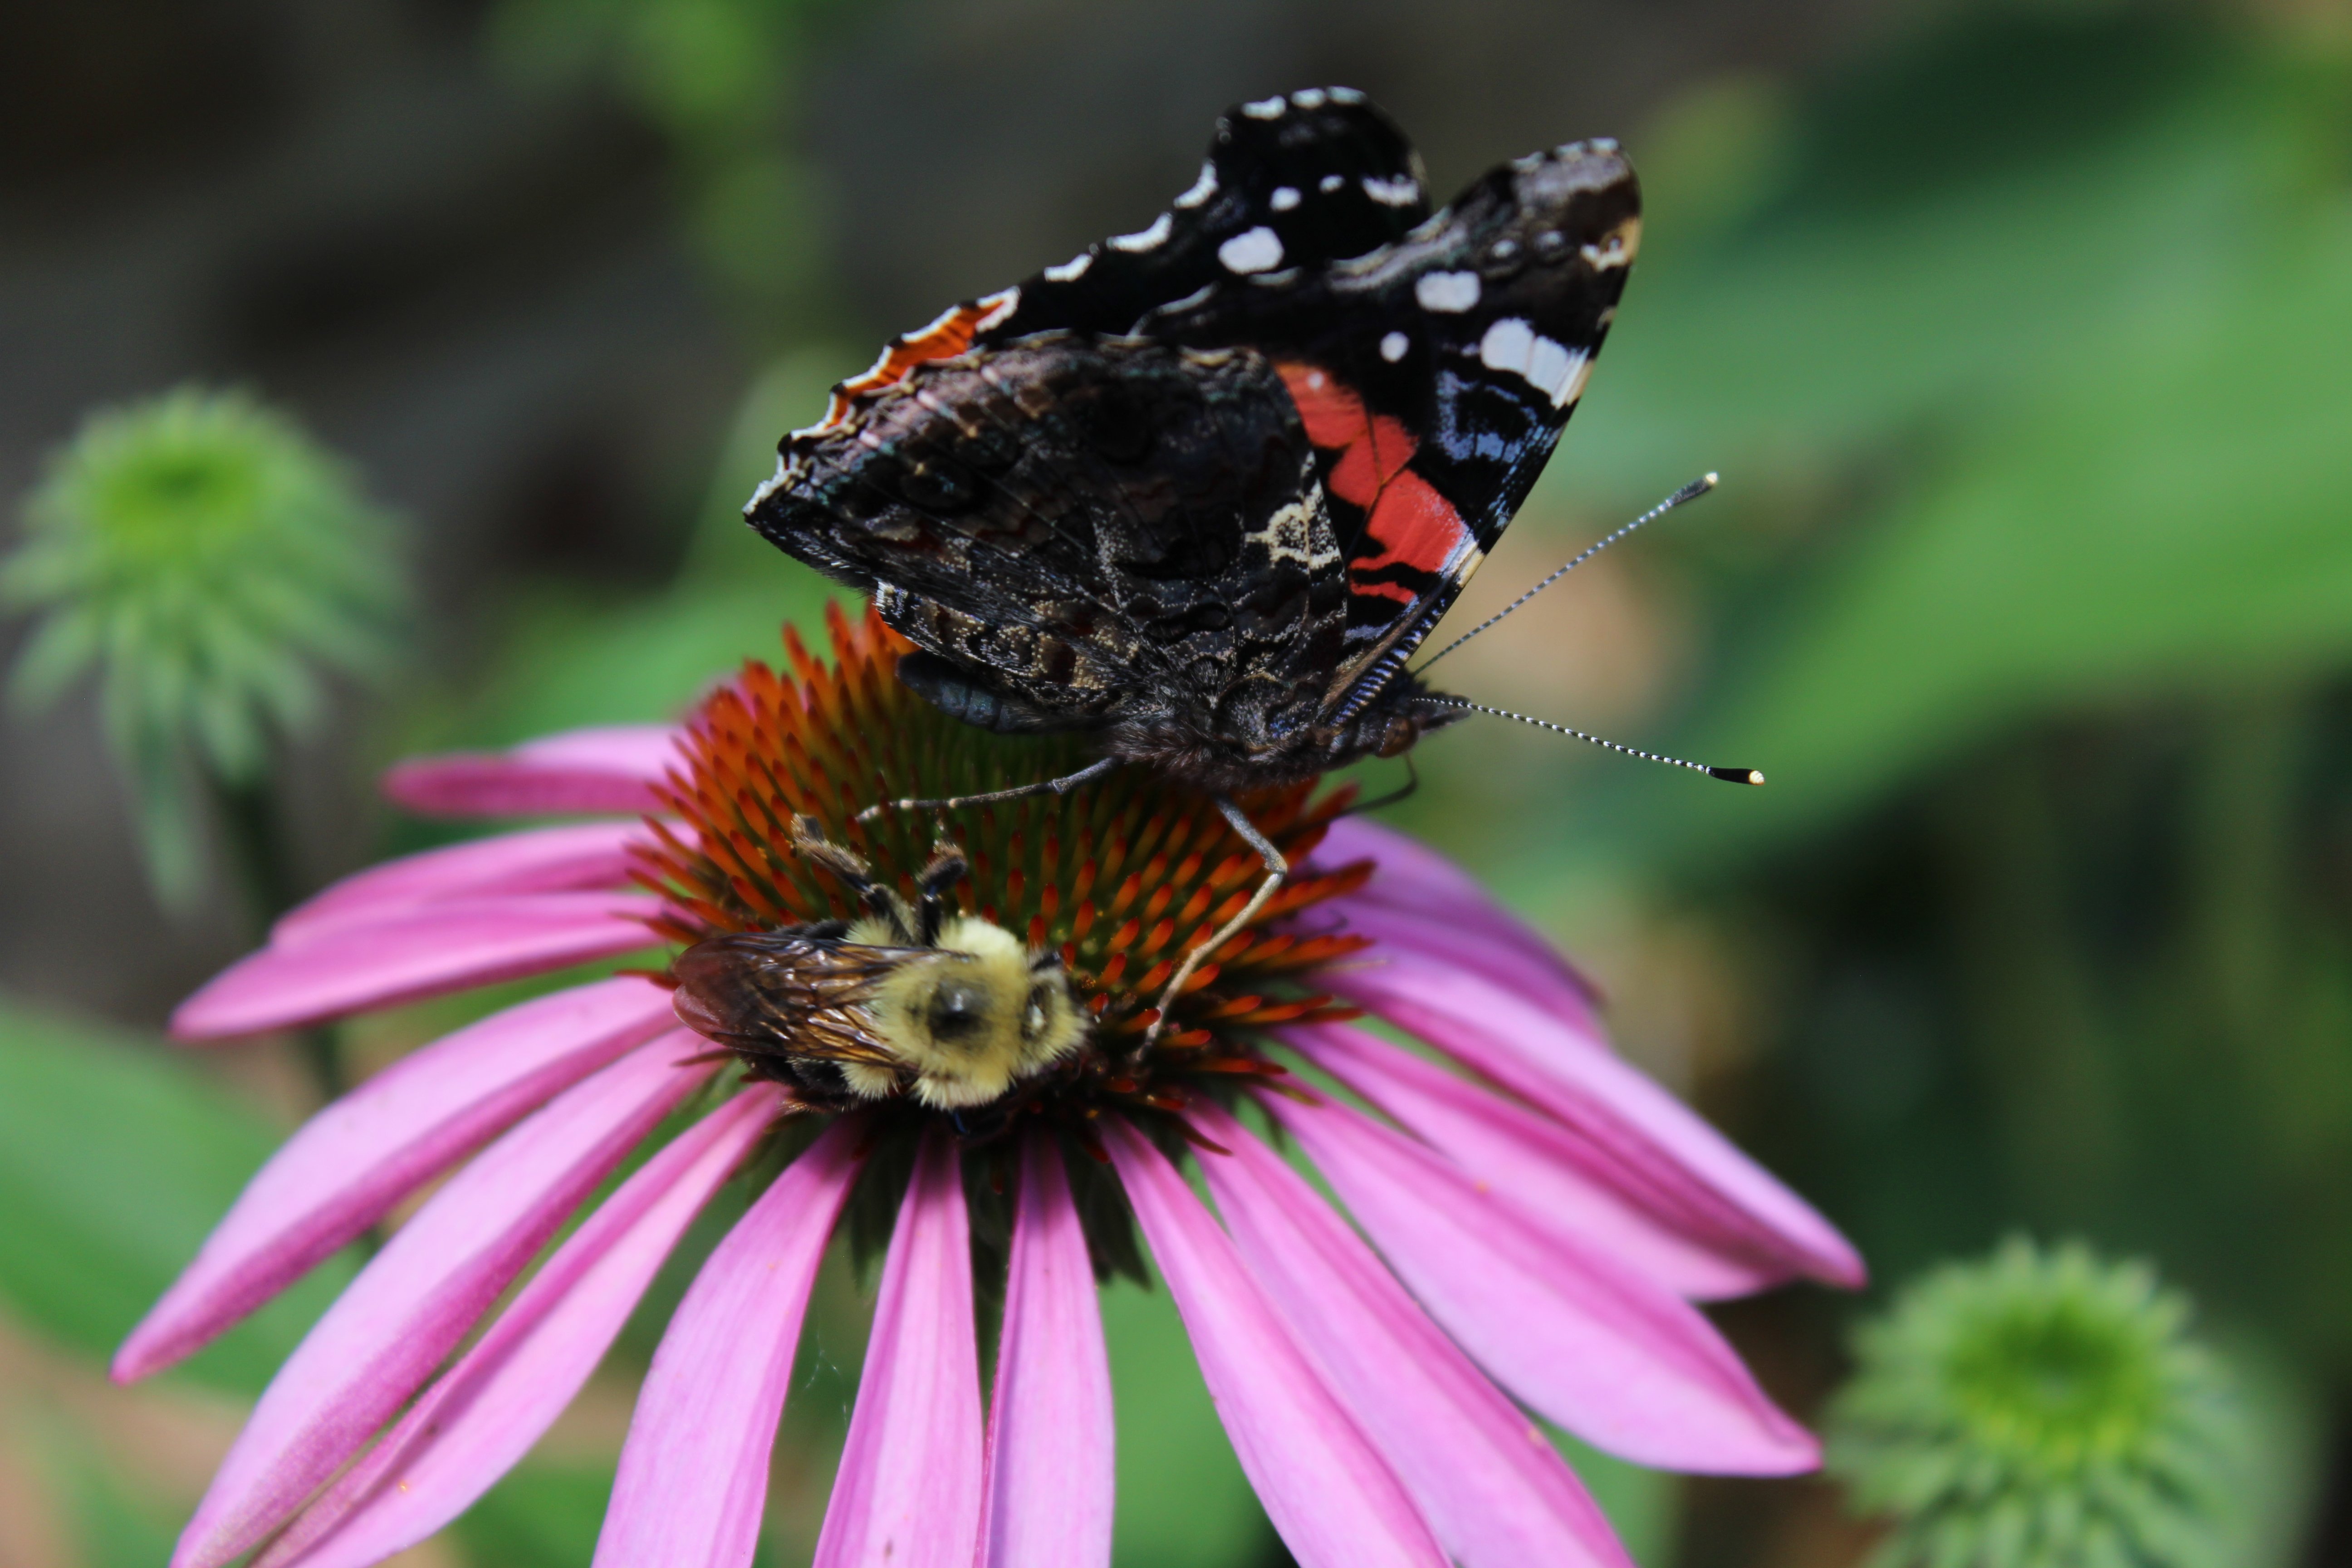 Butterfly perched on a flower.